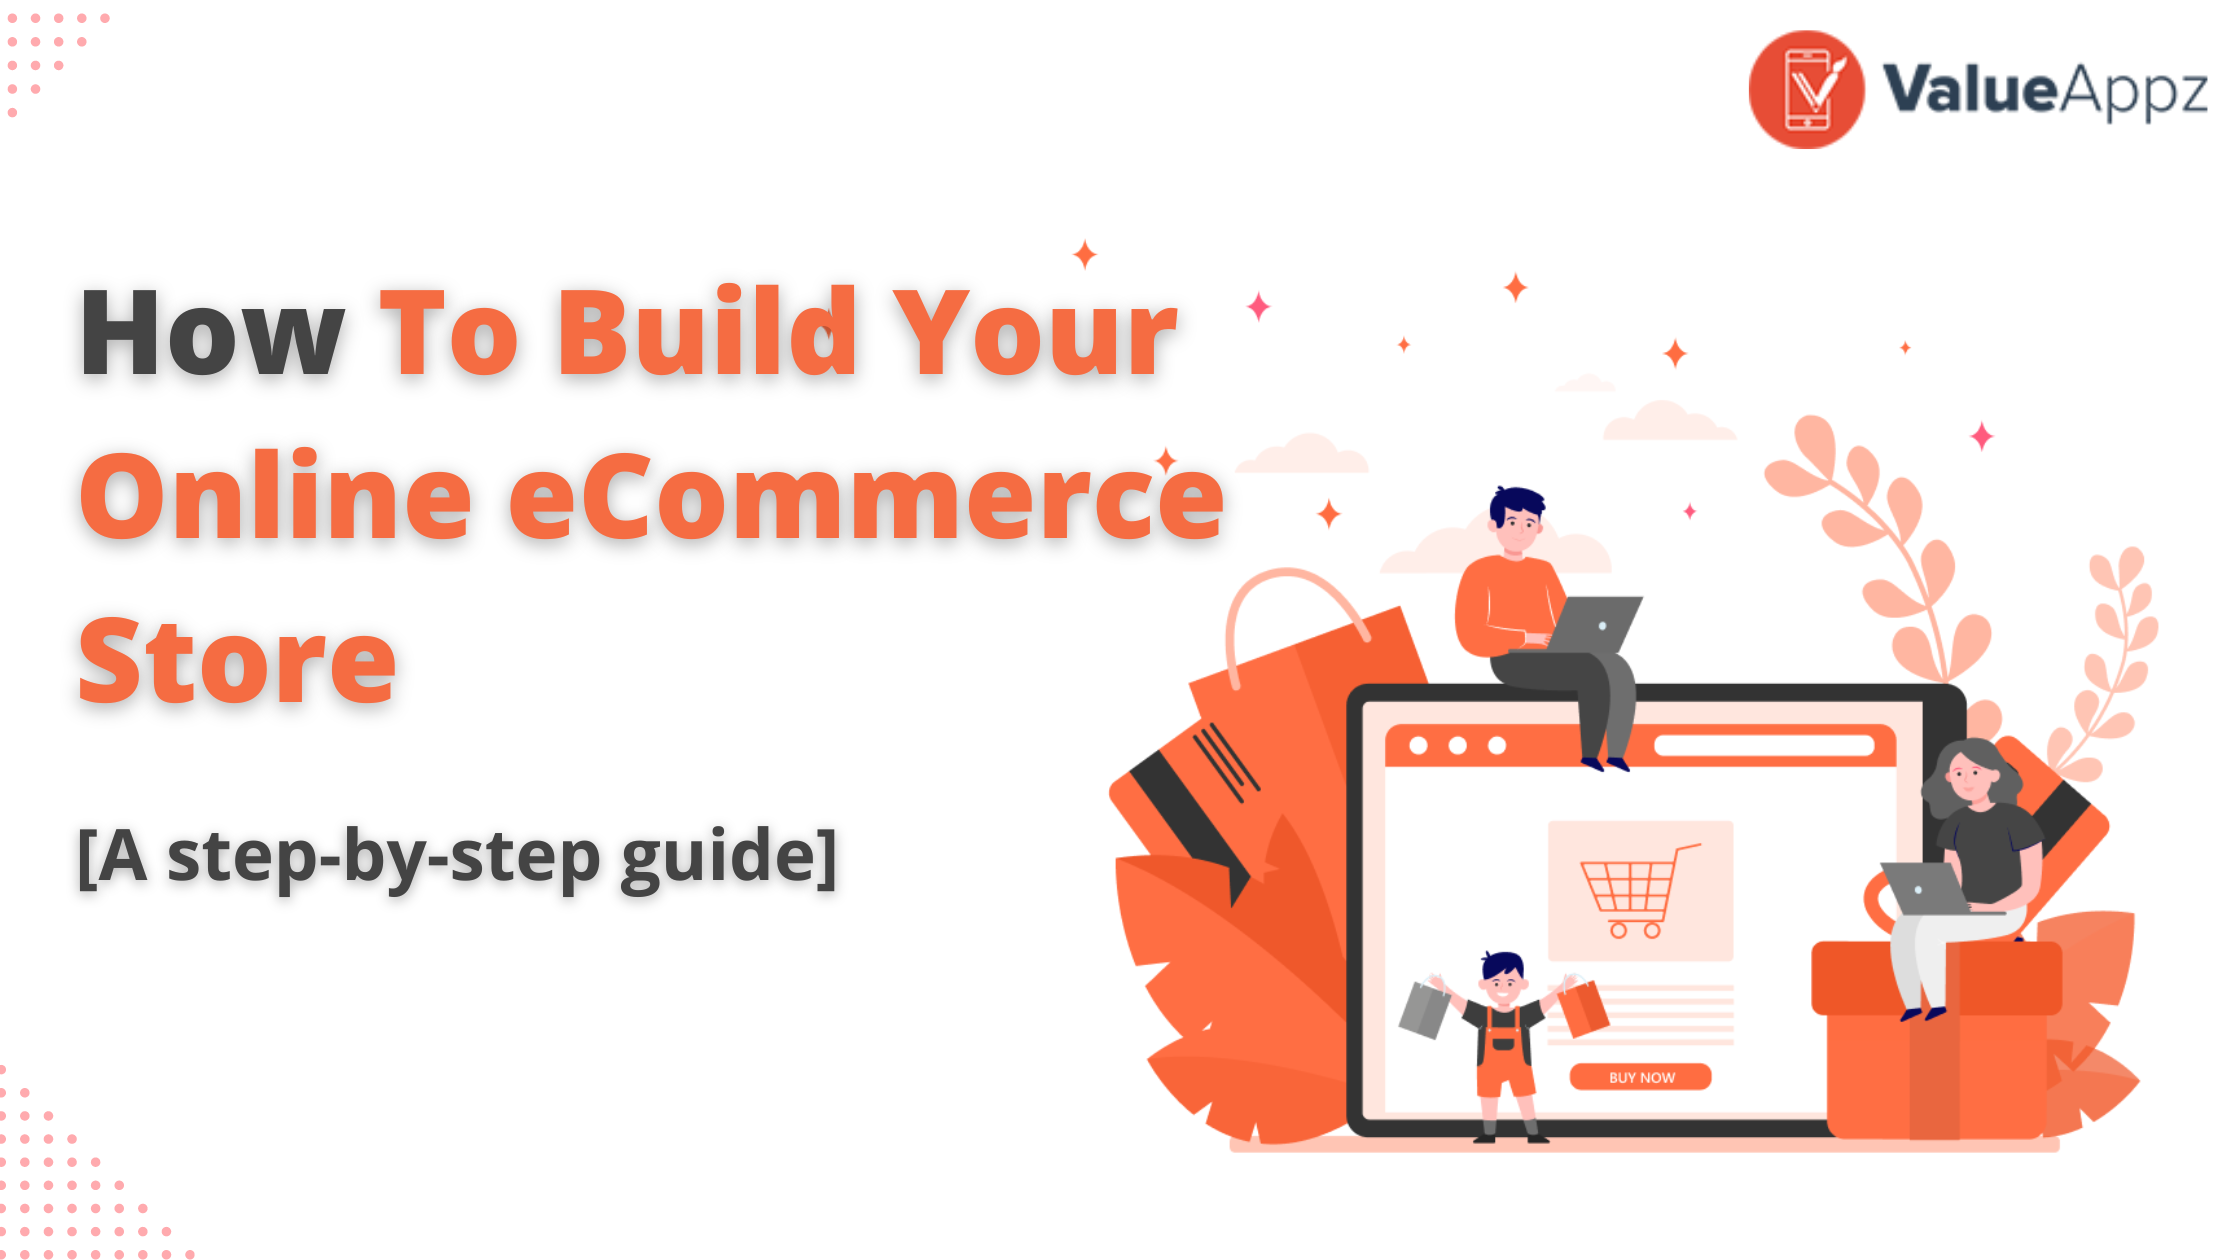 How To Build Your Online eCommerce Store